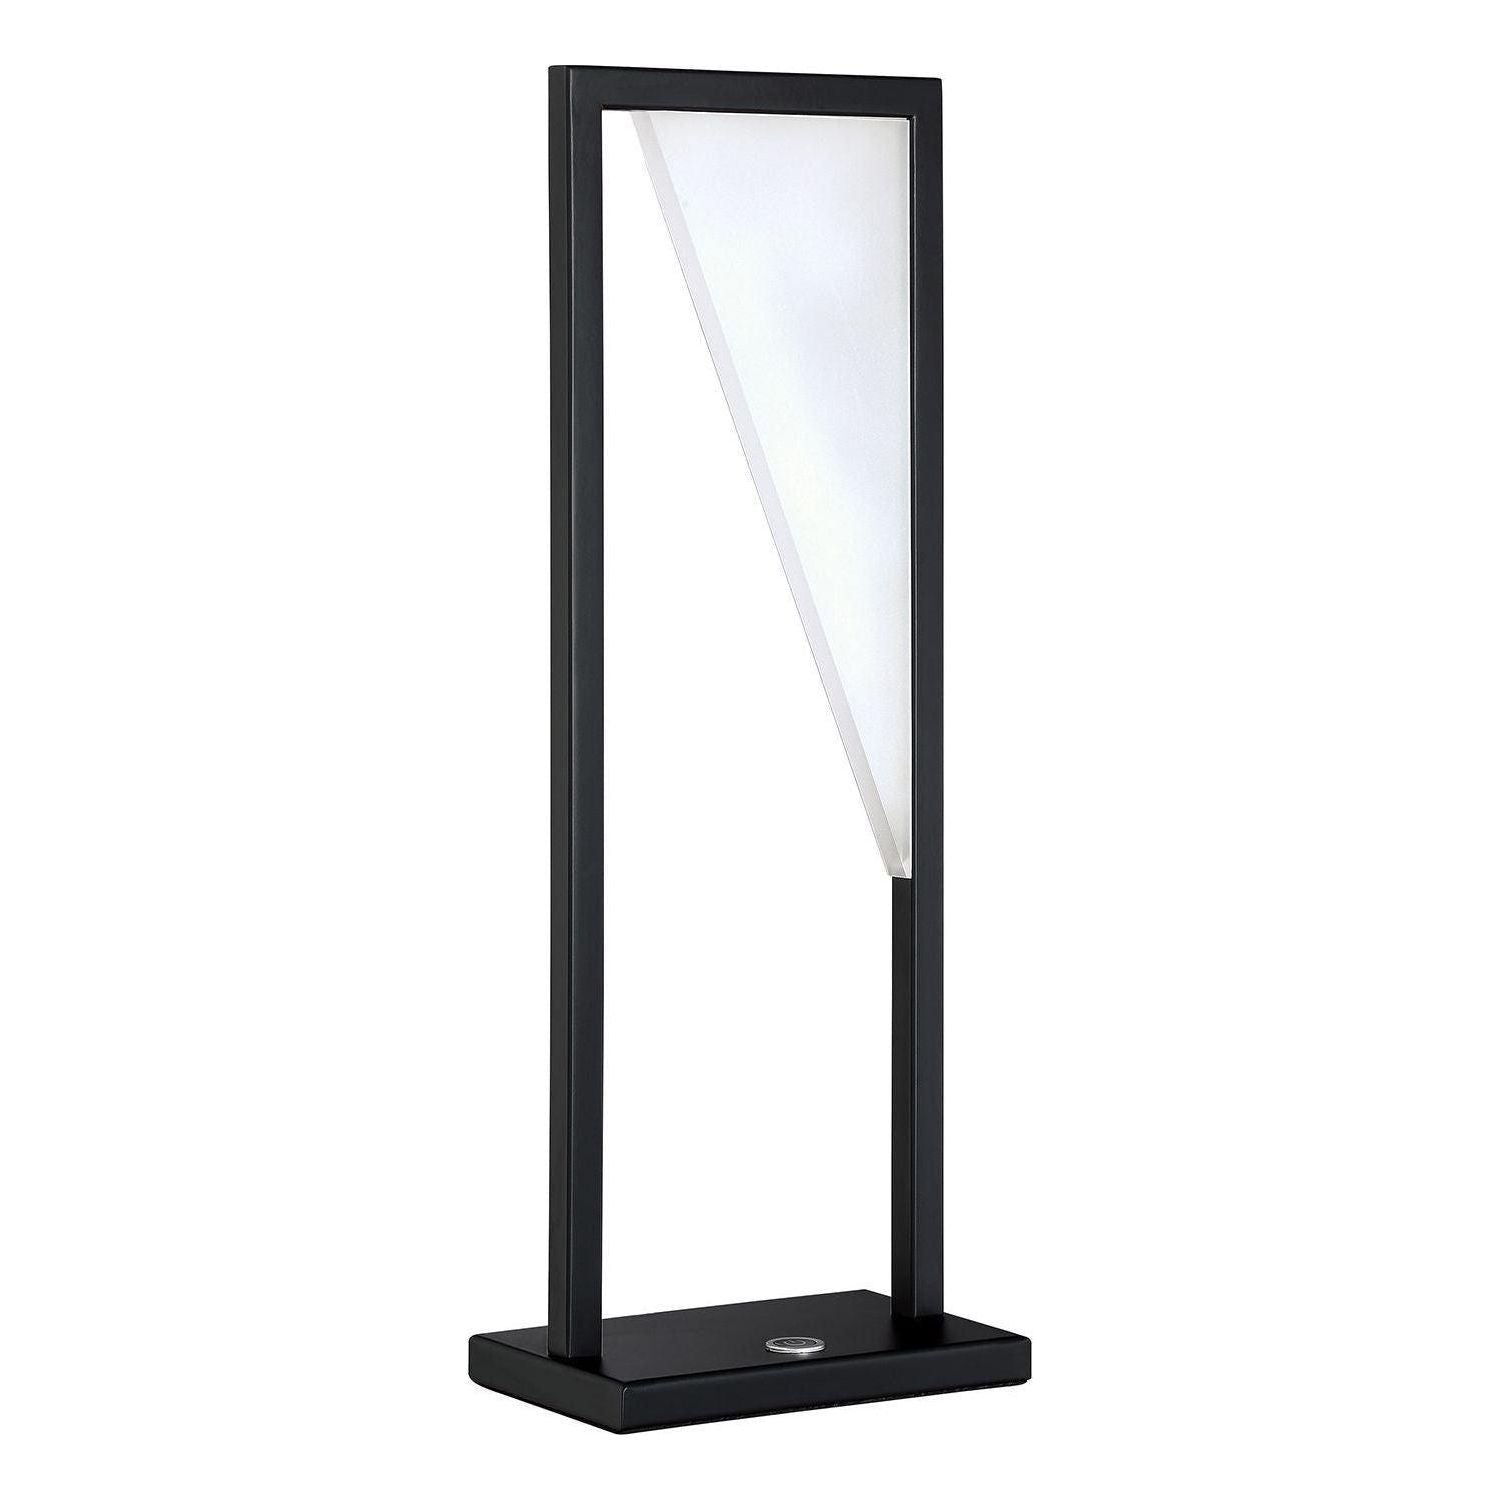 Voxx Table Lamp